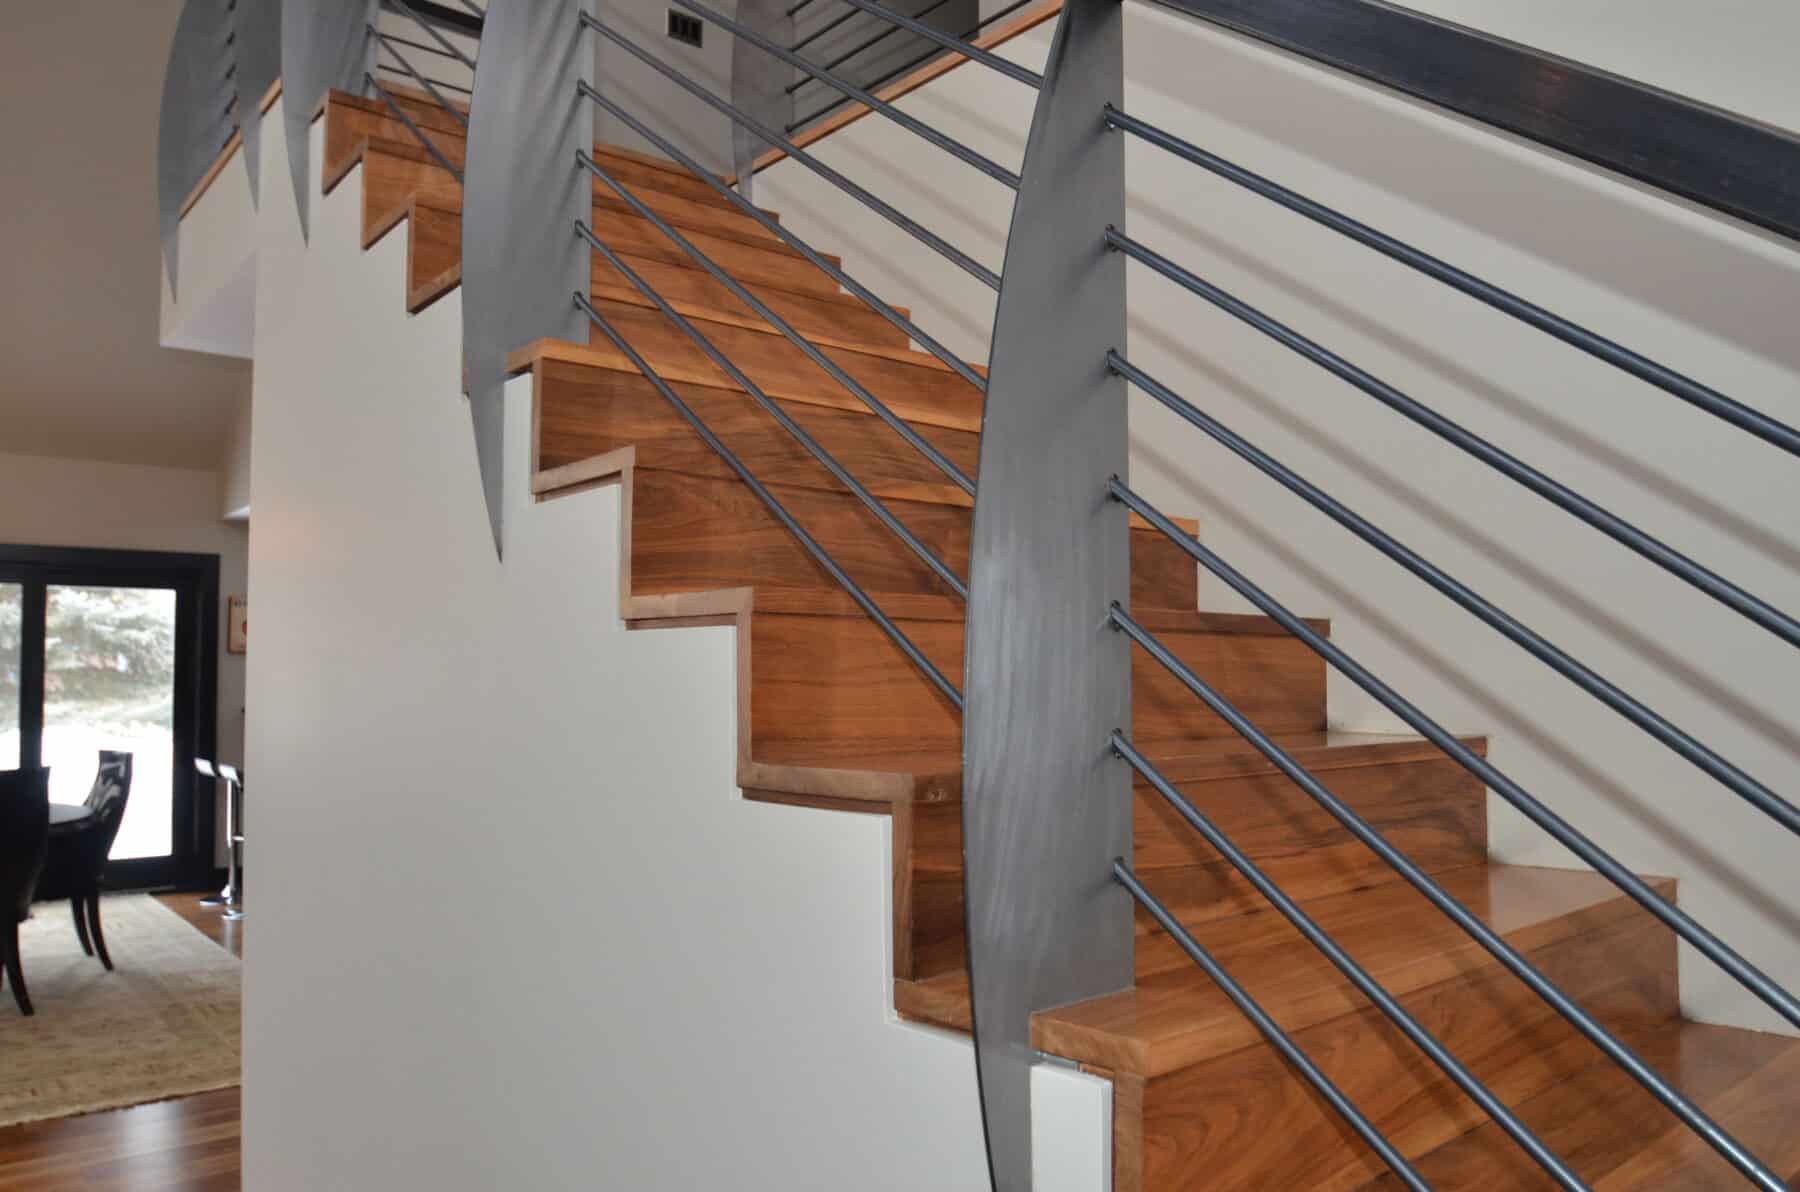 Award Winning Metal Art Staircase in Mountain Modern Home in Custom Fabrication & Specialty Contractors S&E Design Build Featured Project: Basalt Custom Home